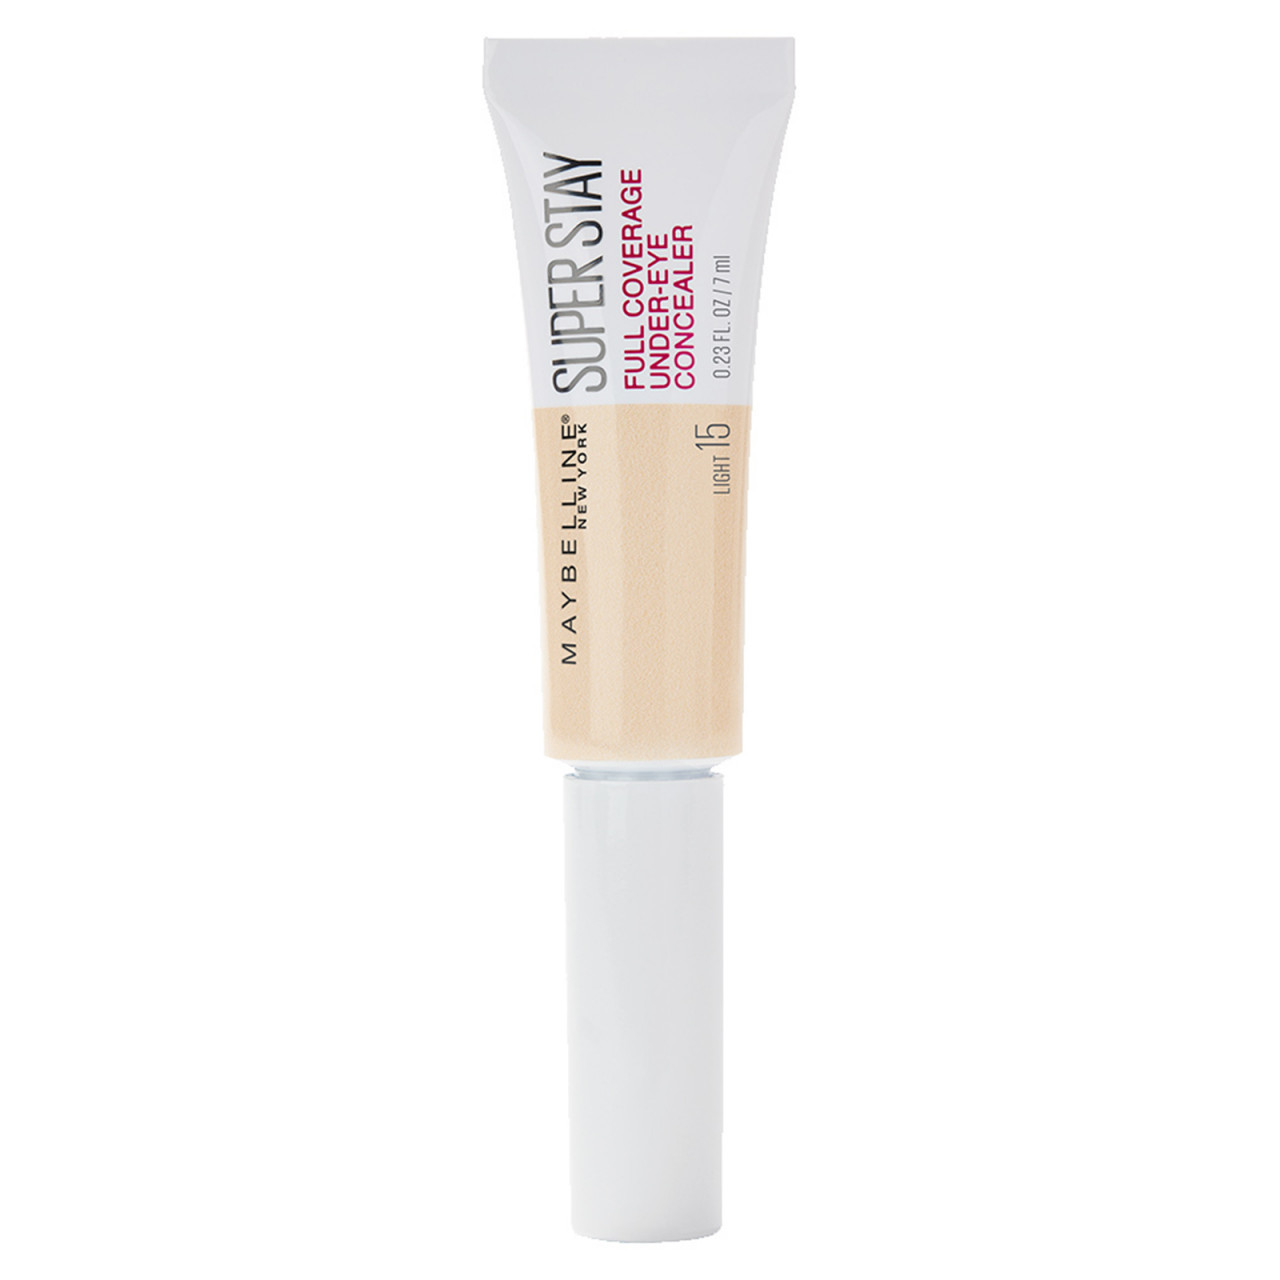 MAYBELLINE MB ROSTRO CORRECTOR SUPER STAY FULL 15